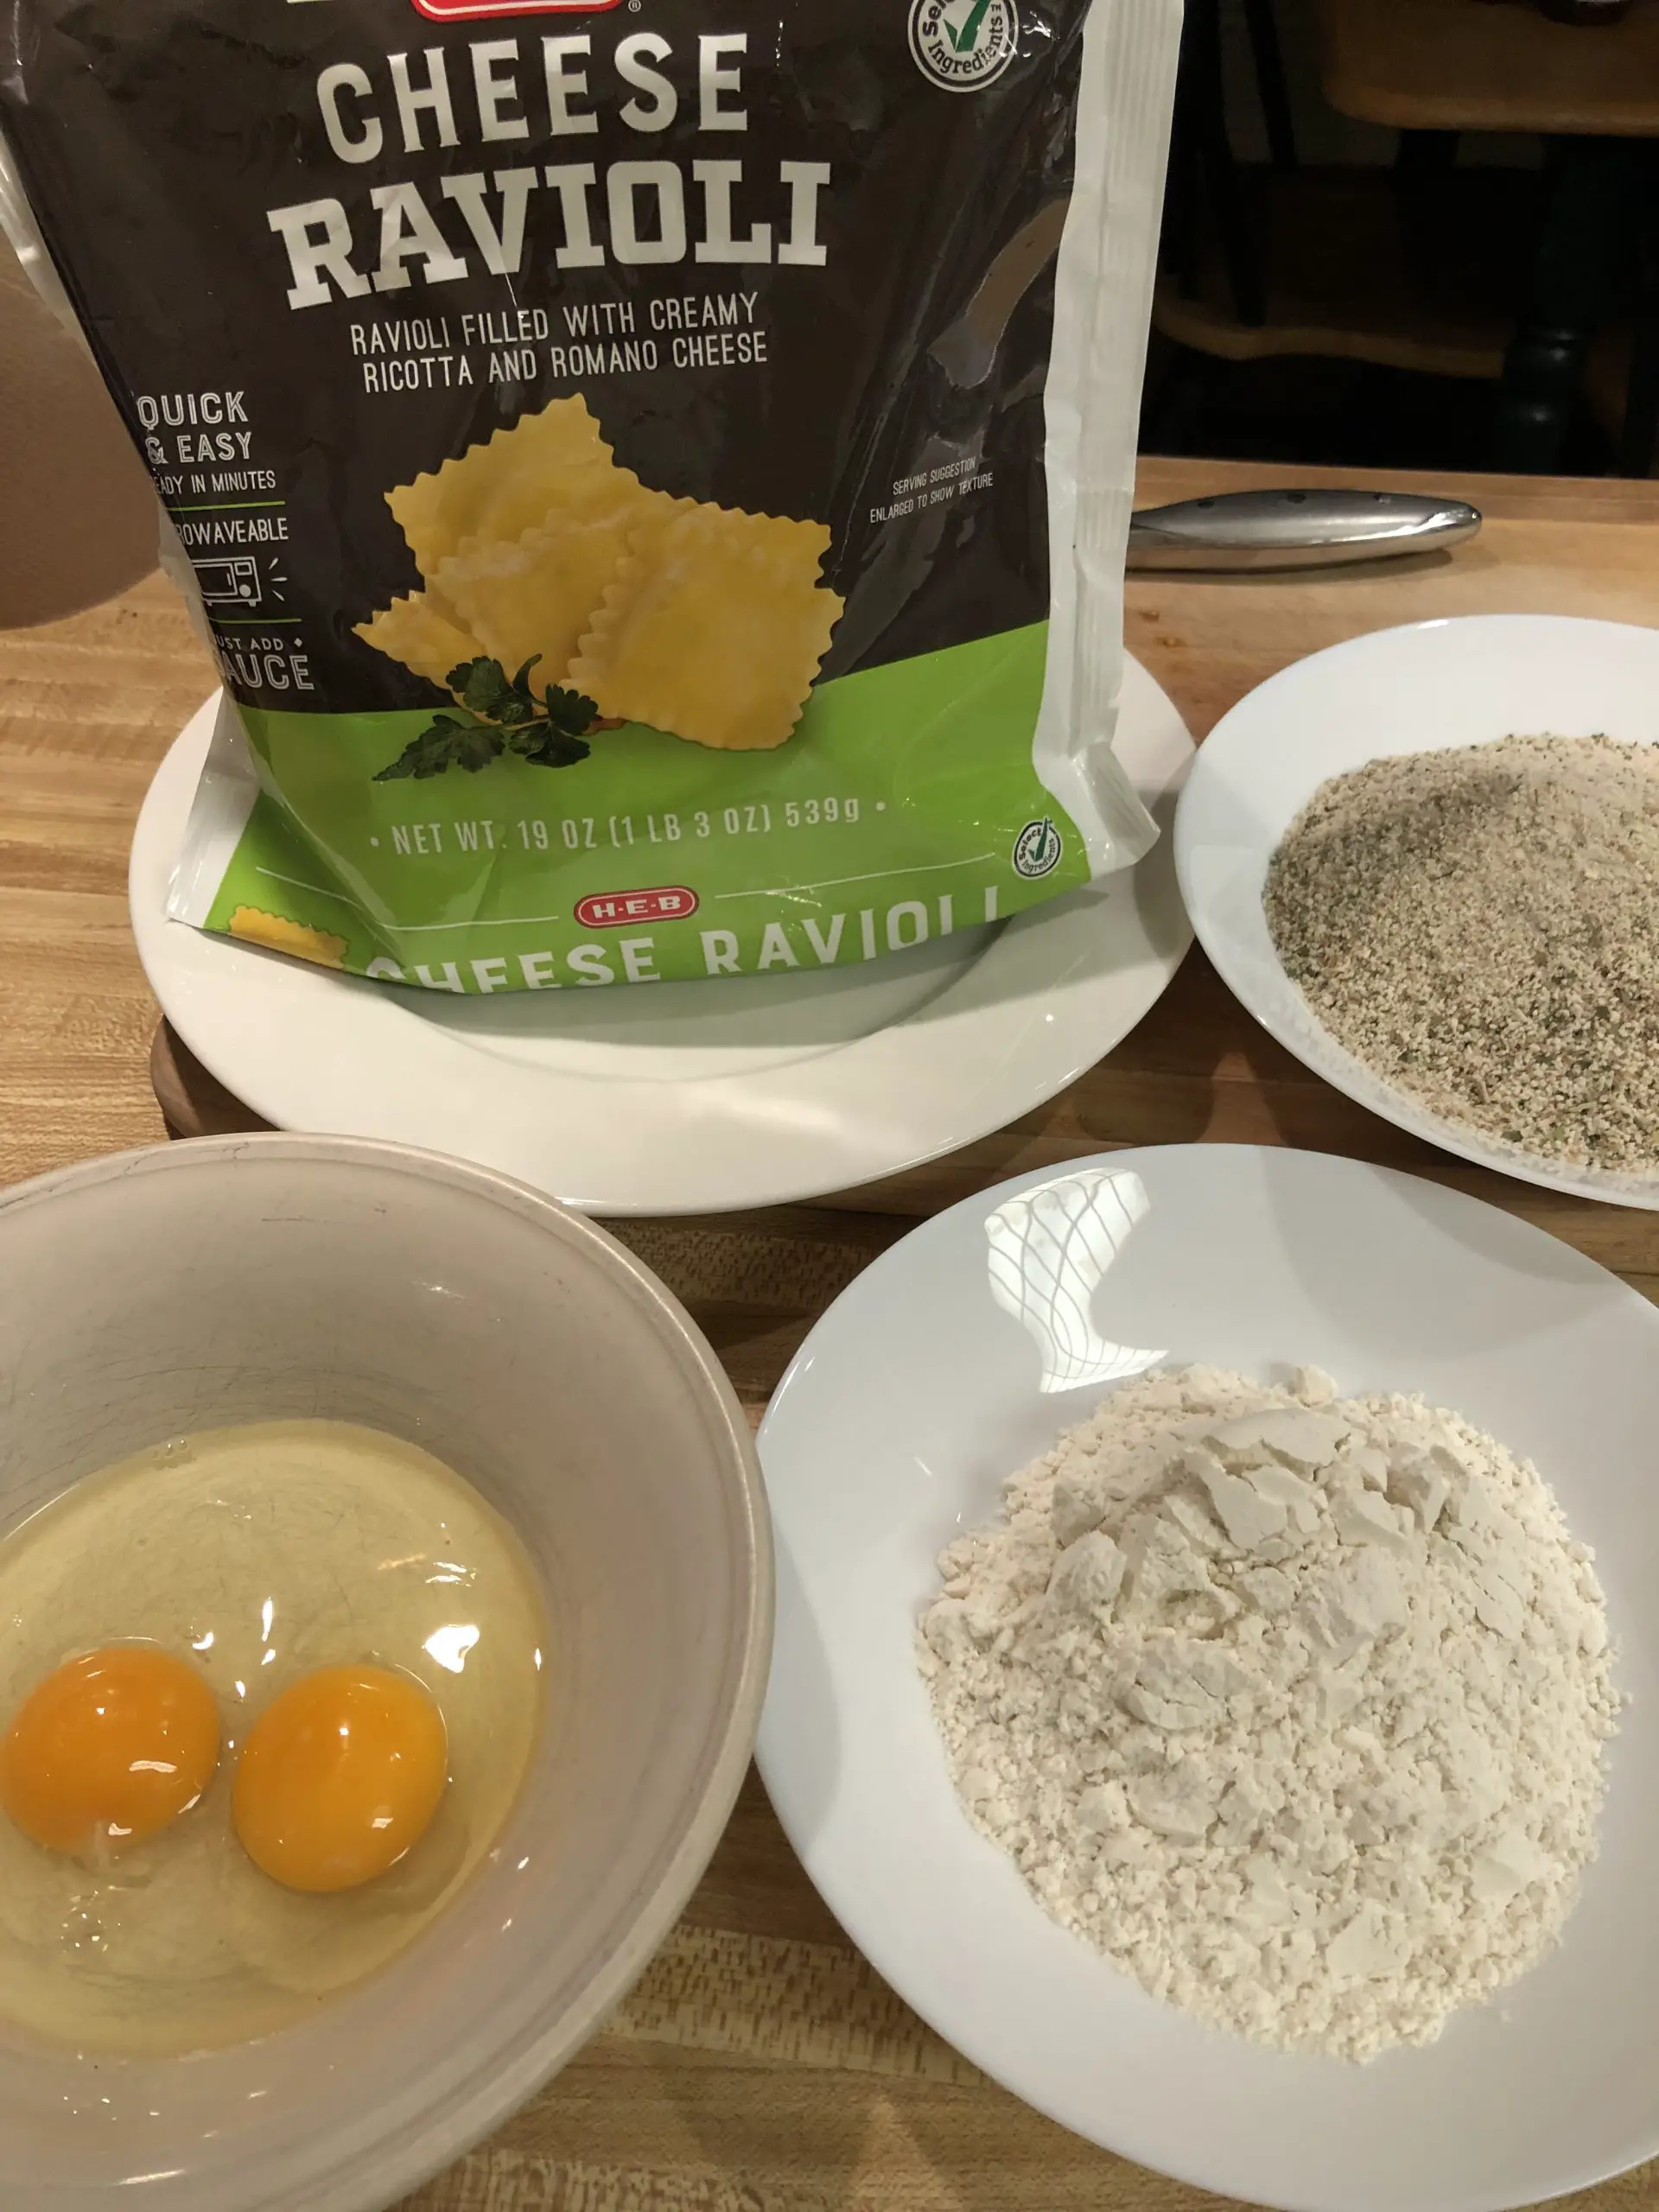 Bag of cheese ravioli, eggs in a bowl, flour in a white bowl, Italian breadcrumbs in a white bowl